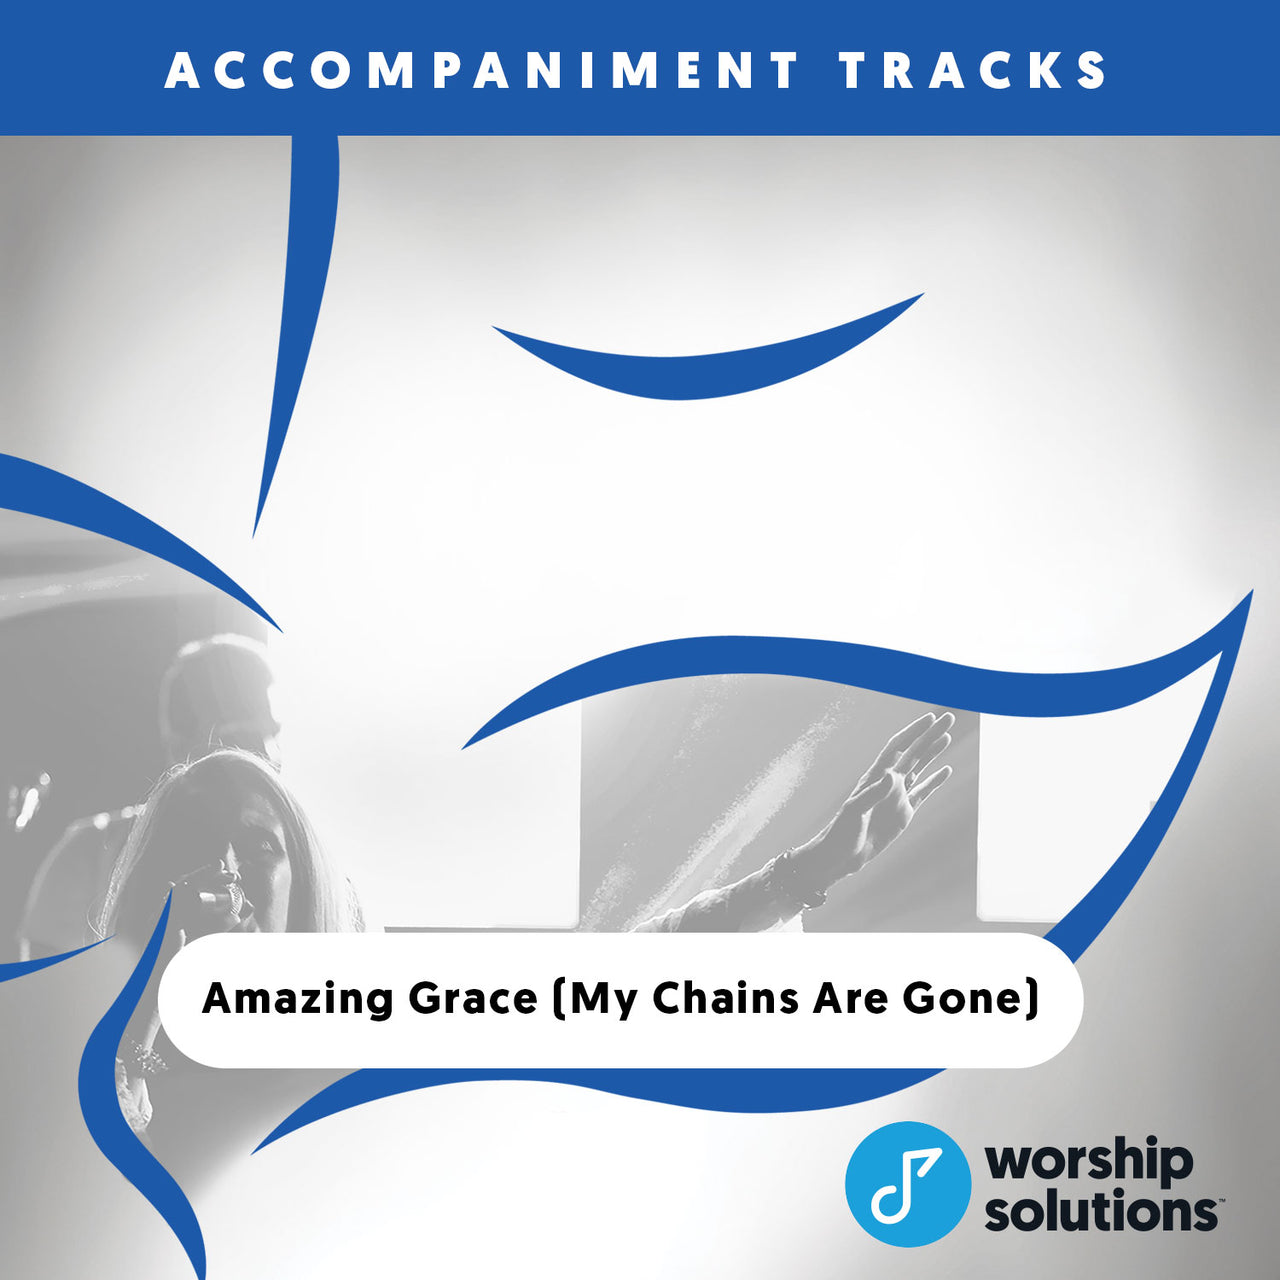 Amazing Grace (My Chains Are Gone), Accompaniment Track